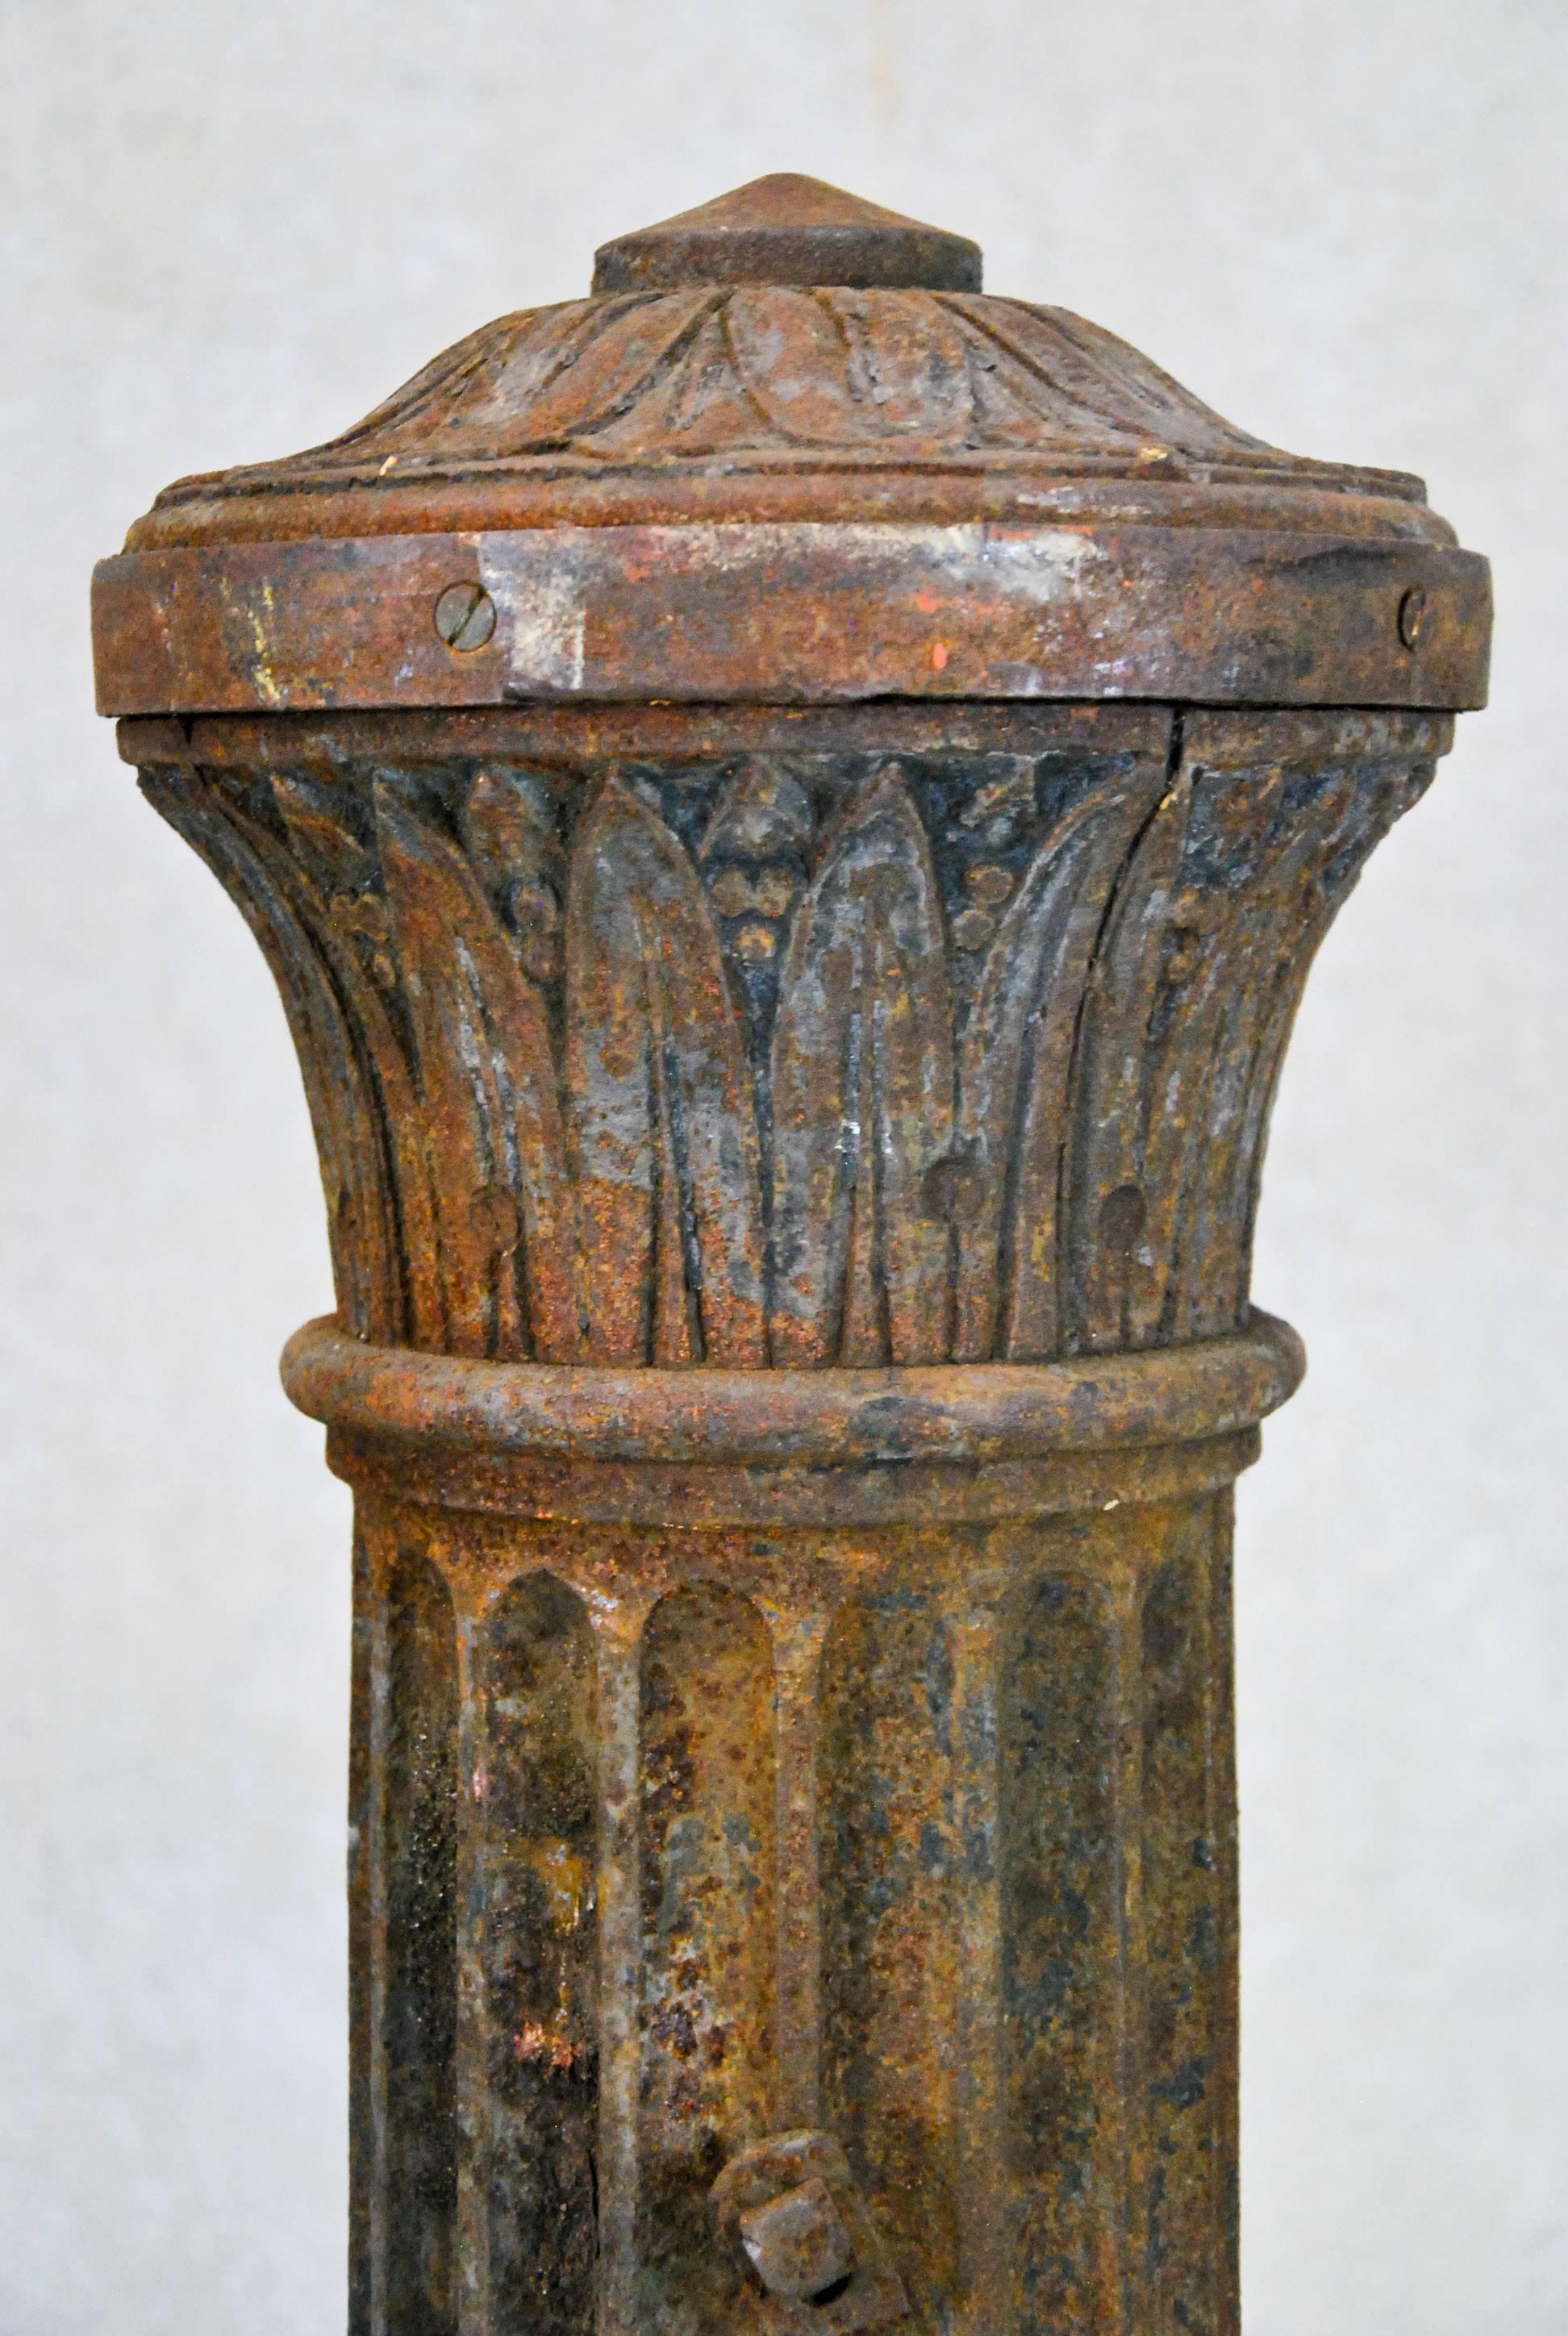 Beautiful and heavy cast iron posts with molded details, salvaged in NYC area in the late 1970s. We have four posts plus two half posts. They are in 'as found' untouched condition.